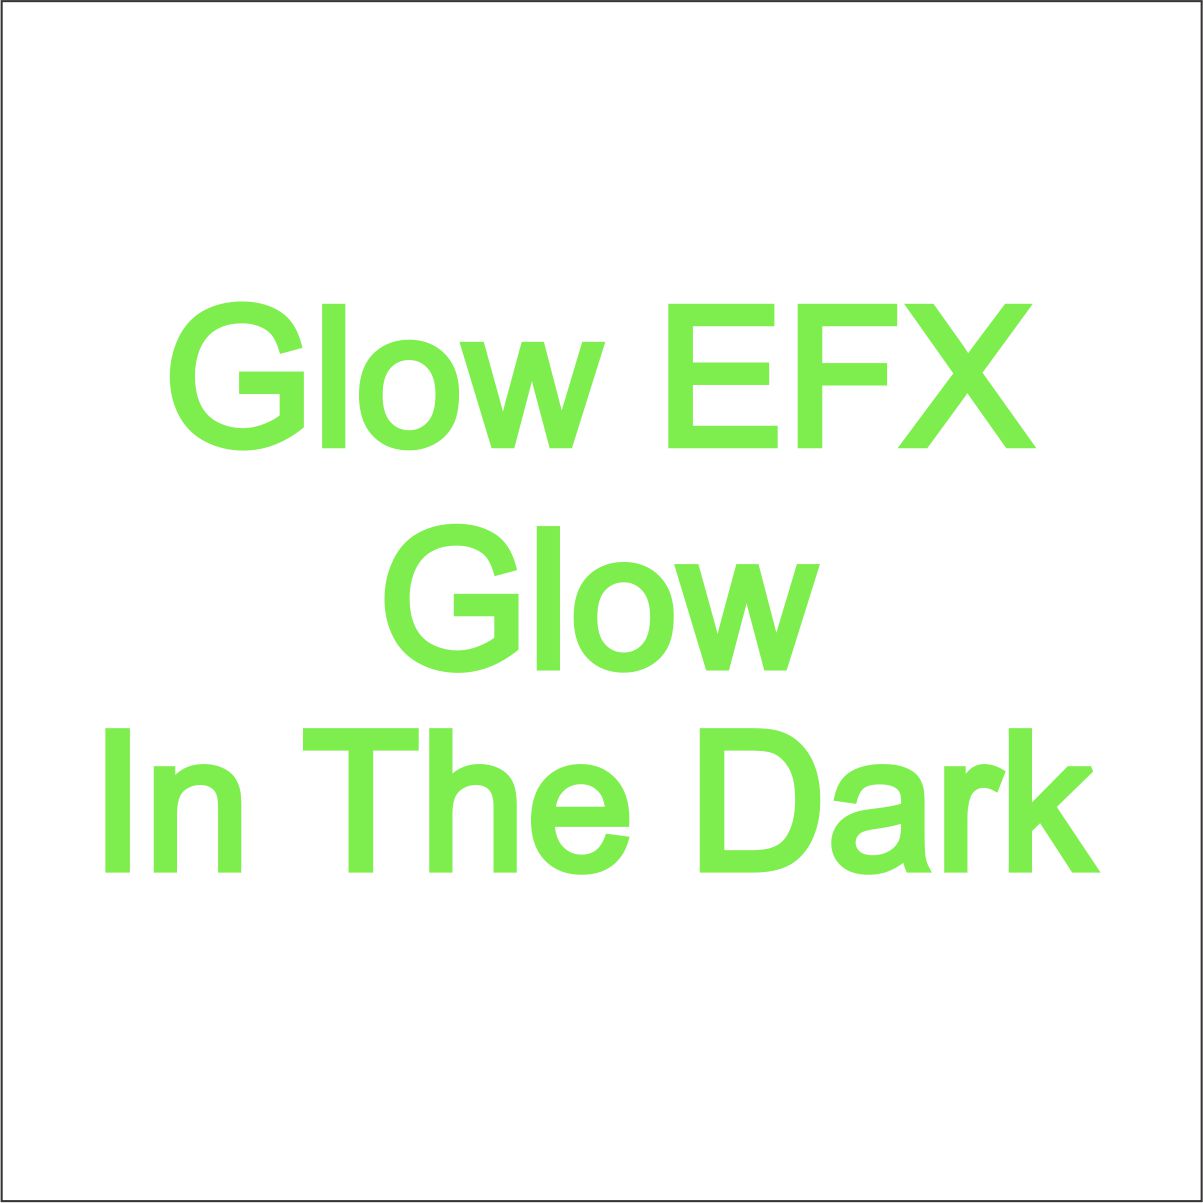 Glow EFX Glow In The Dark Adhesive Vinyl (Clearance) - CraftCutterSupply.com